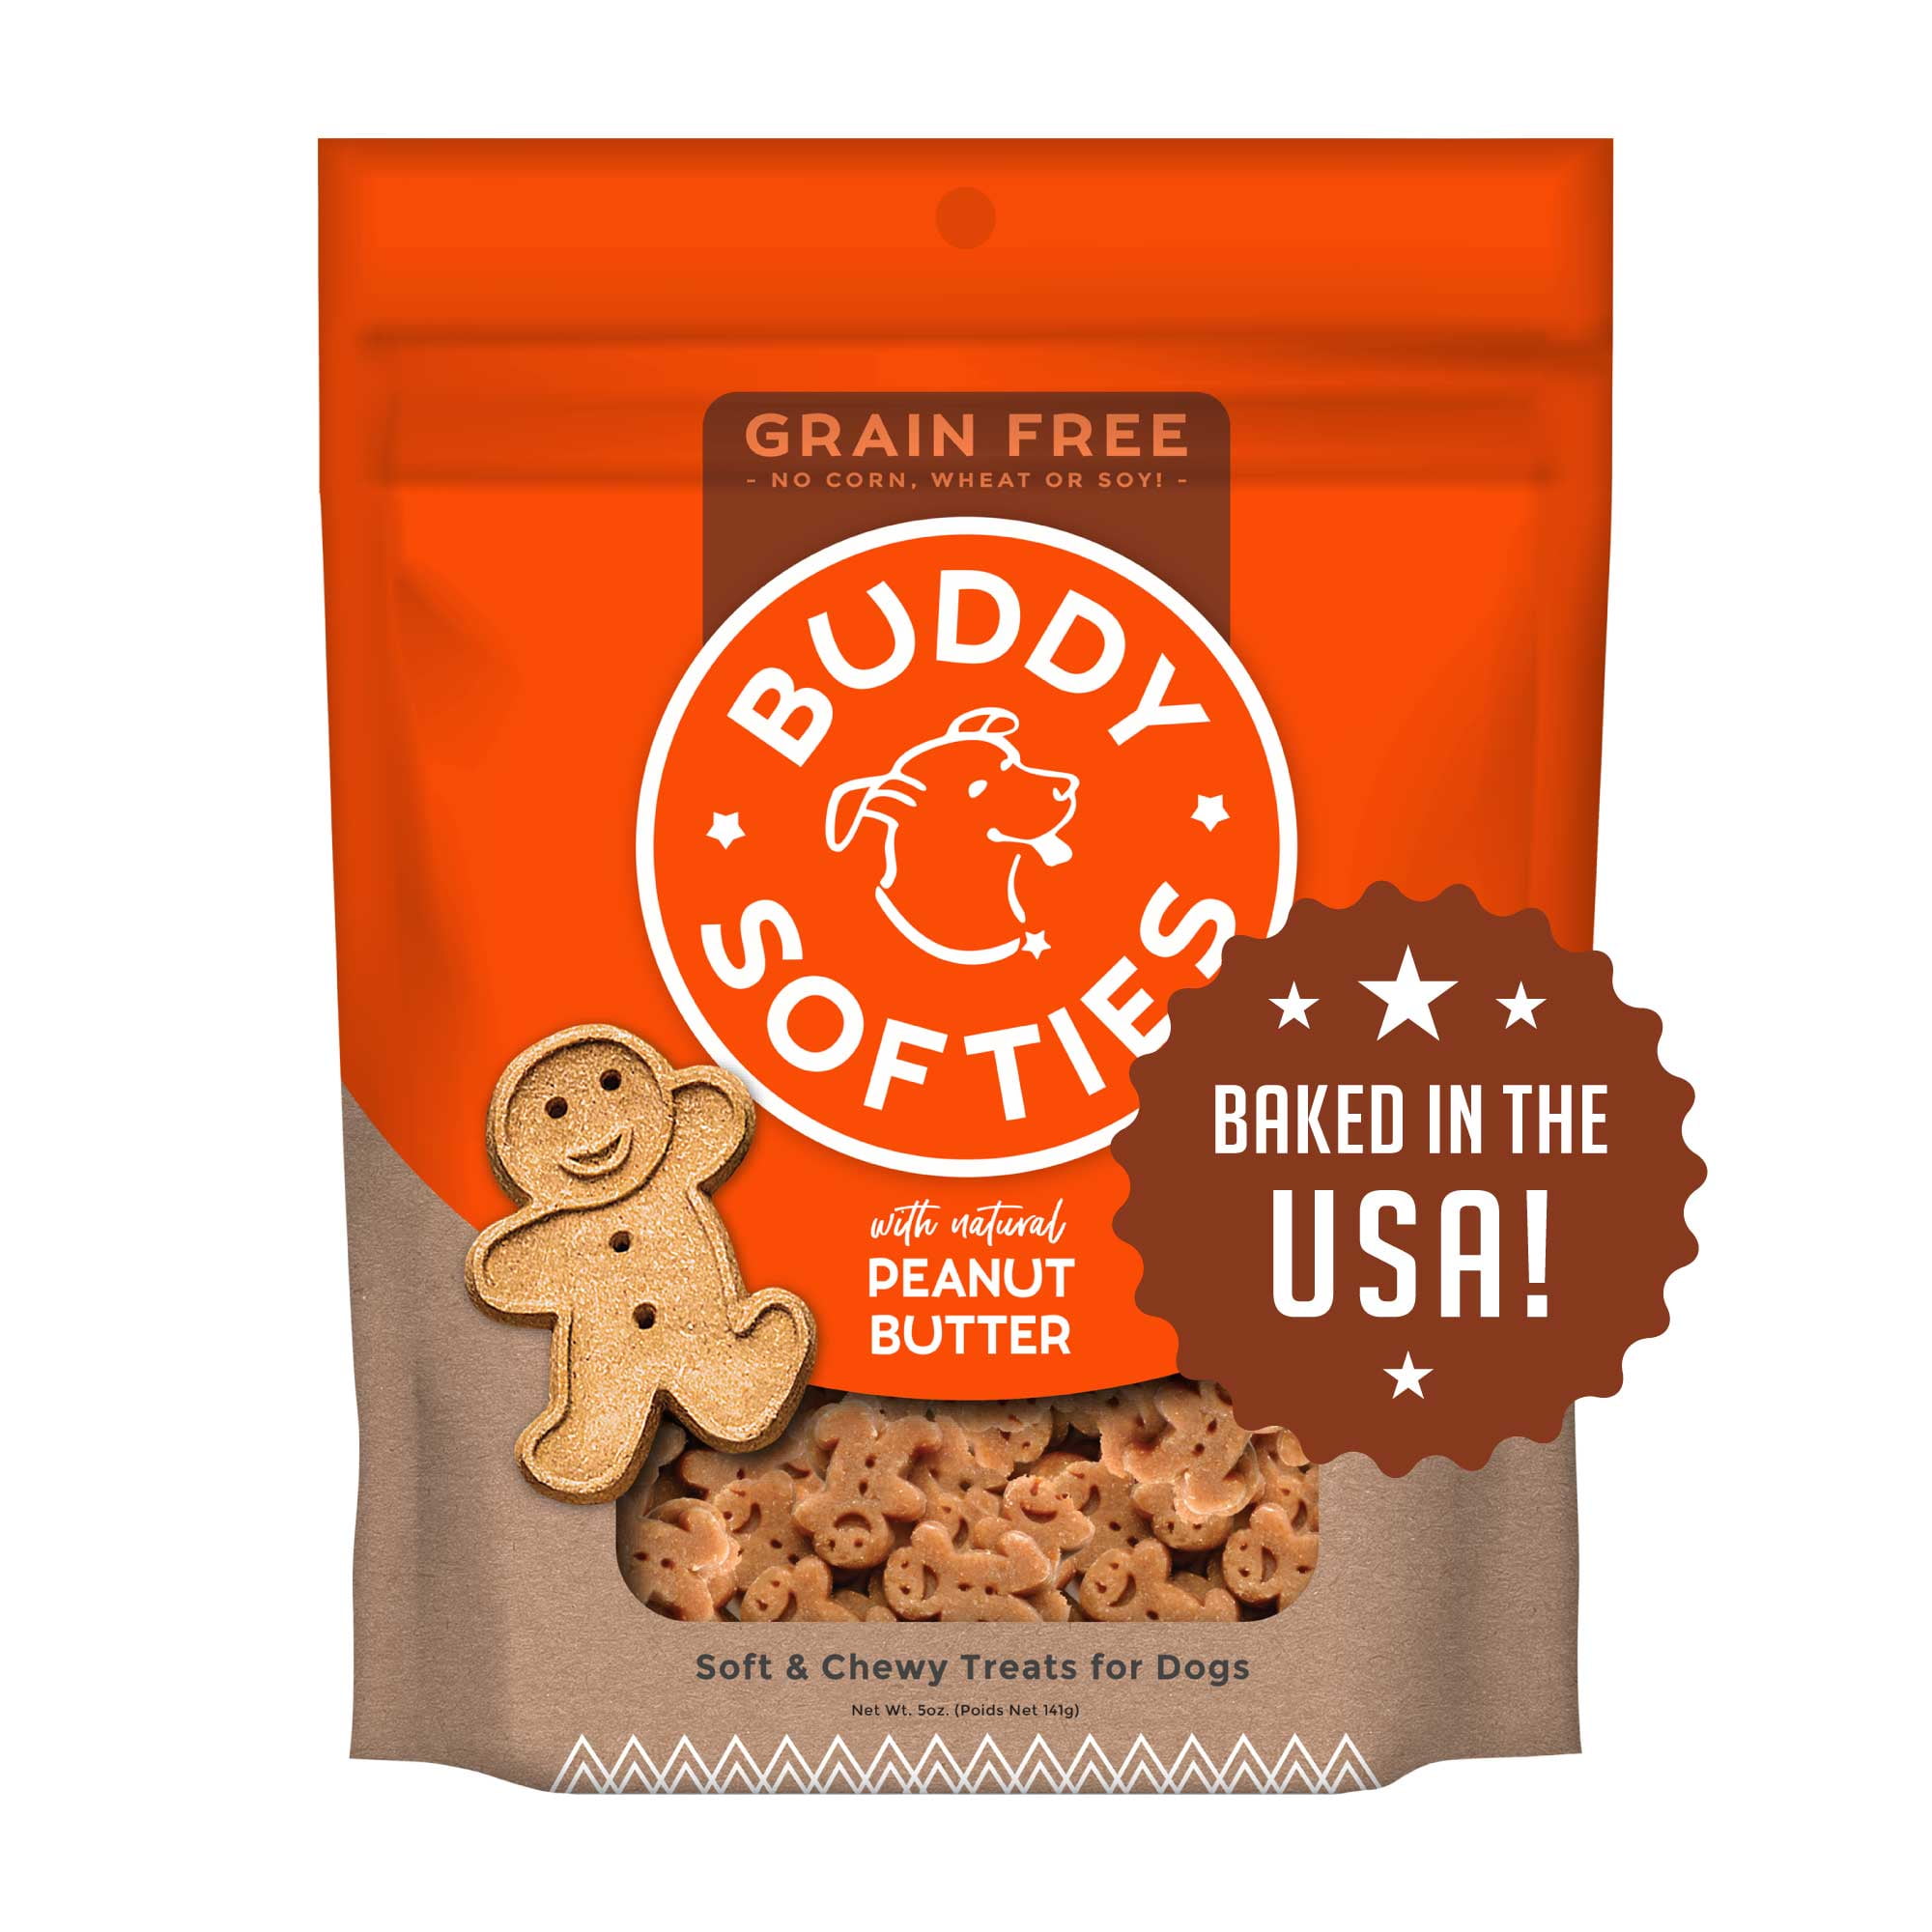 Buddy Biscuits Grain Free Dog Treats Made in the USA Only Healthy Ingredients No Wheat Corn or Soy 